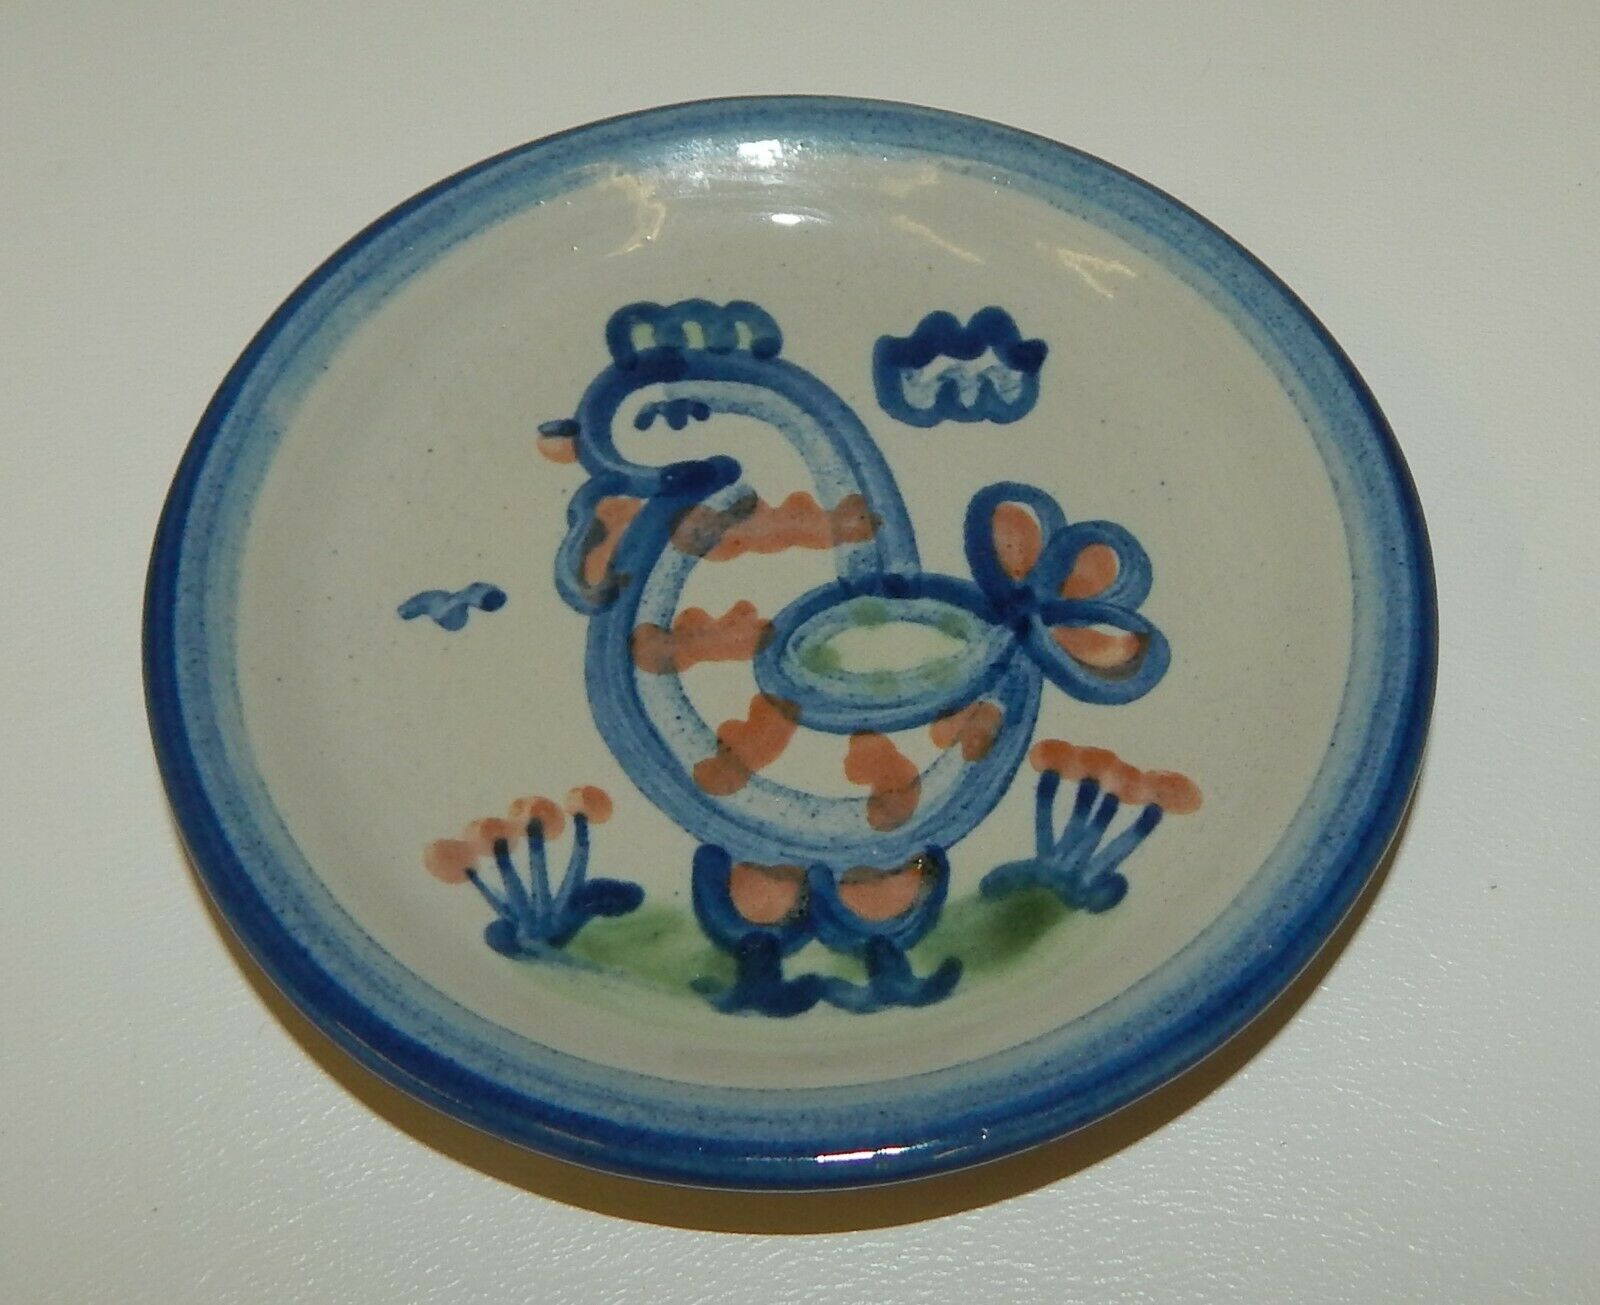 Mary Hadley Pottery 4" Coaster Mini Plate Trinket Dish - Country Chicken Rooster